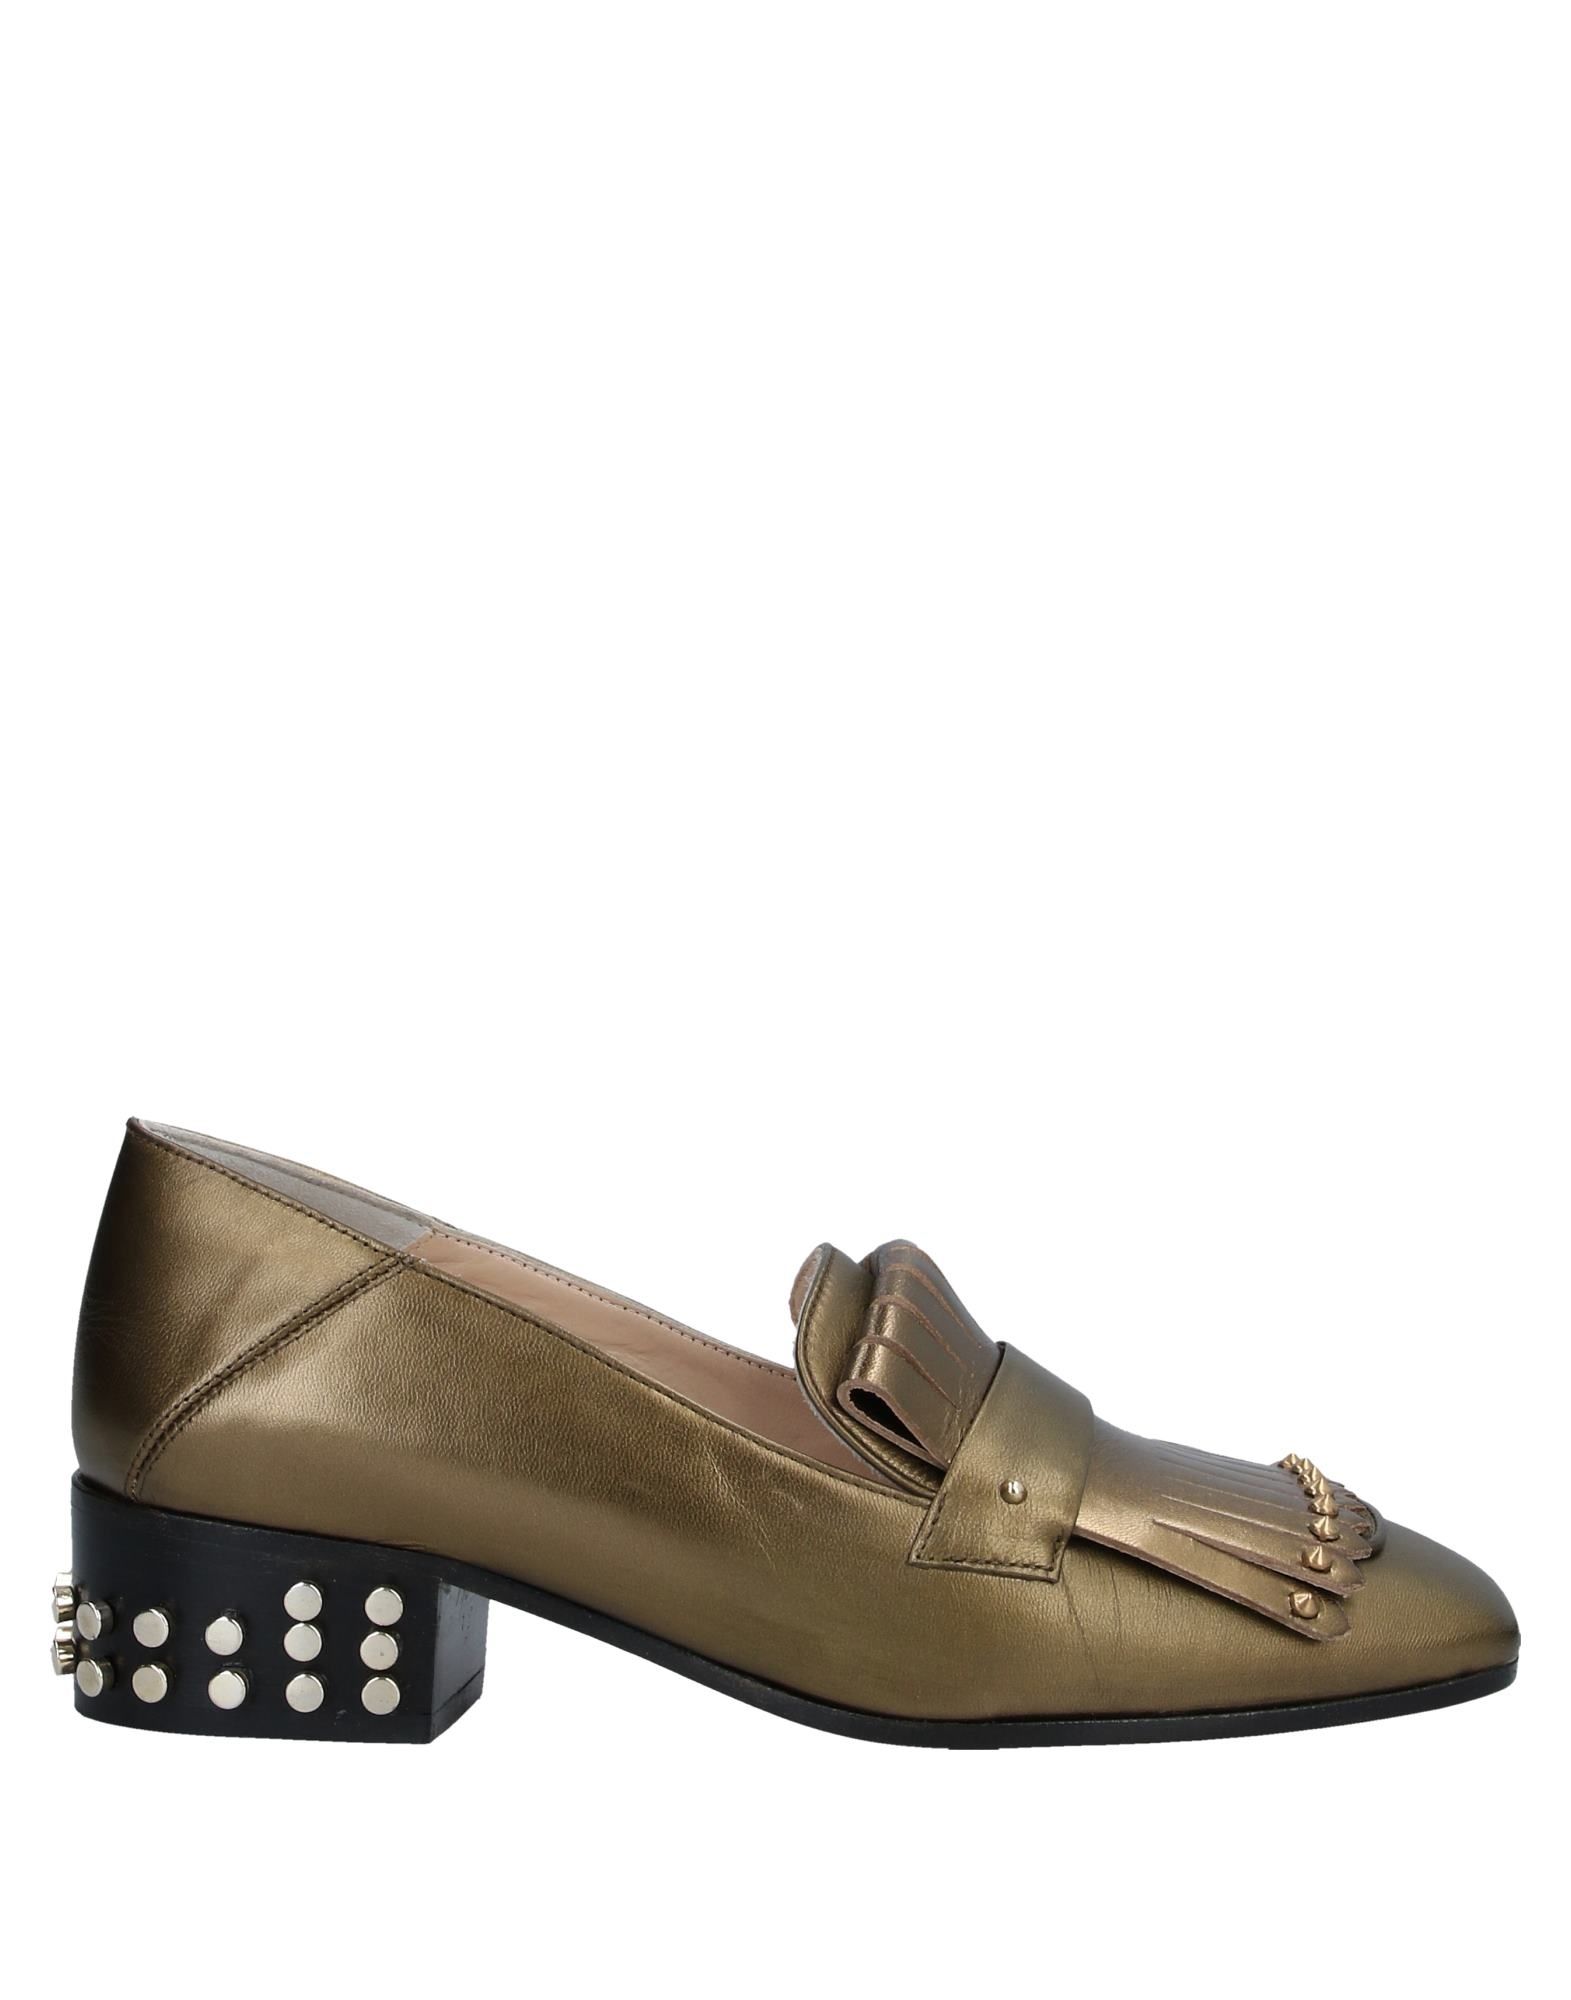 SPACE STYLE CONCEPT Loafers,11448359EA 11